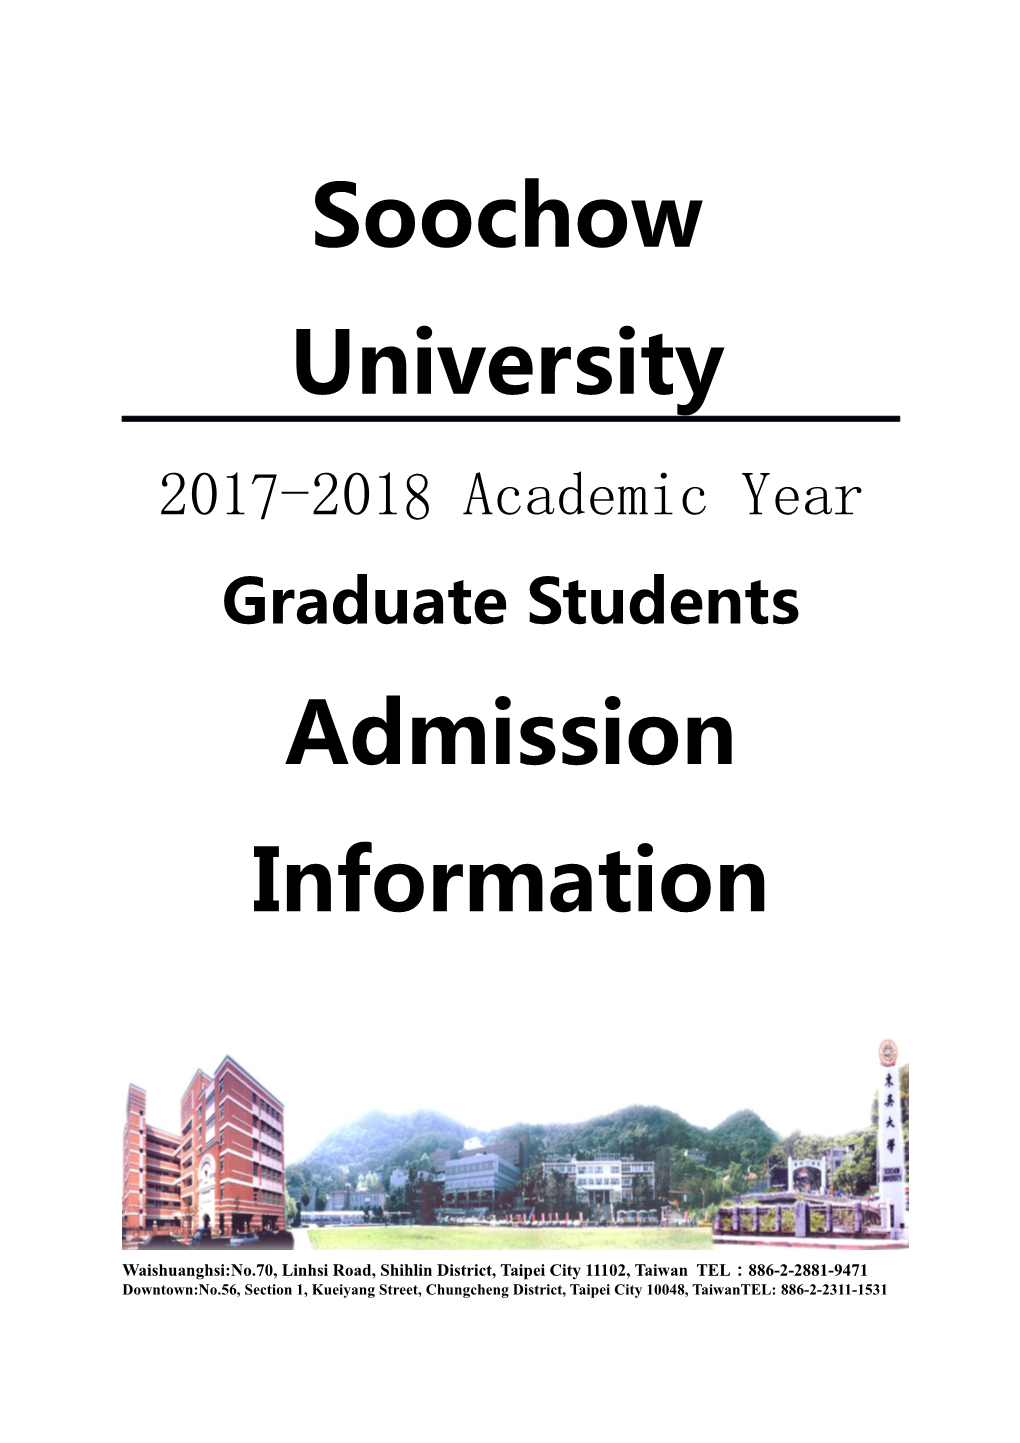 Soochow University Personal Data Collection Statement